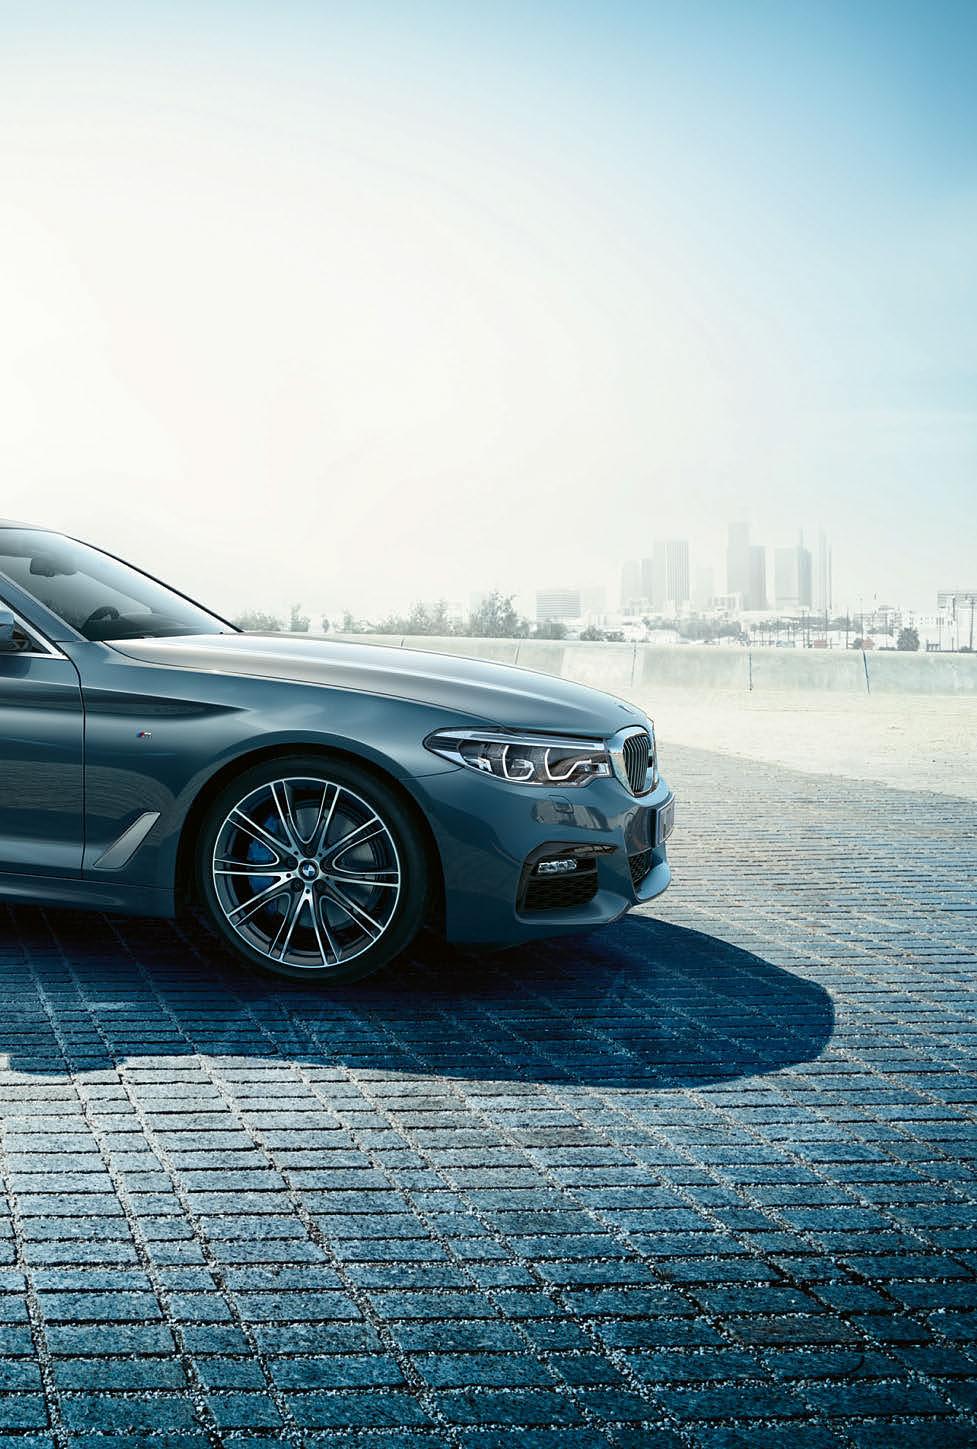 BMW TECHNOLOGIES AND INNOVATIVE CONTROL CONCEPTS MEANS YOU CAN FOCUS ON YOUR DRIVE.